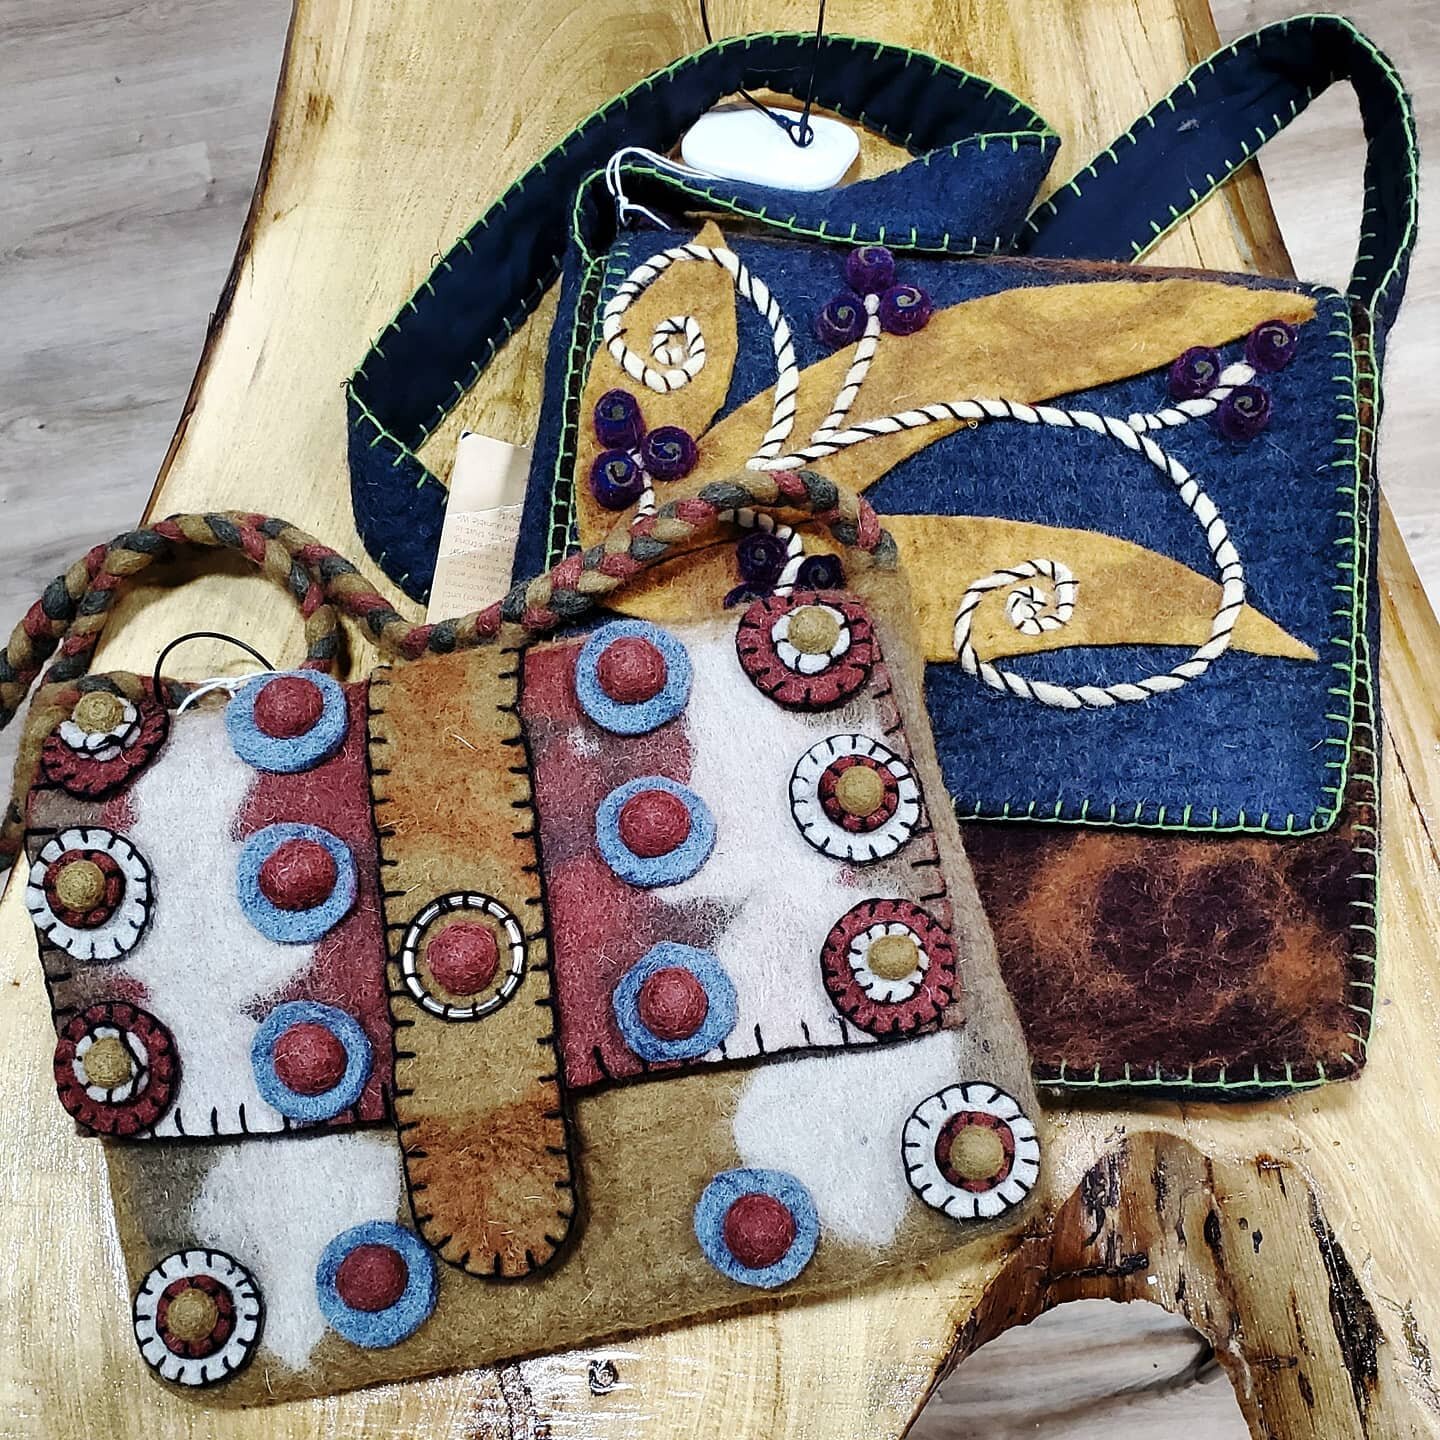 At Old Crows, you can update your home decor AND your wardrobe for fall. These handmade felted wool bags are the perfect accessory for the cooler months ahead! (p.s. It's never too early to start thinking about Christmas gifts!) 

#handmade #feltedwo